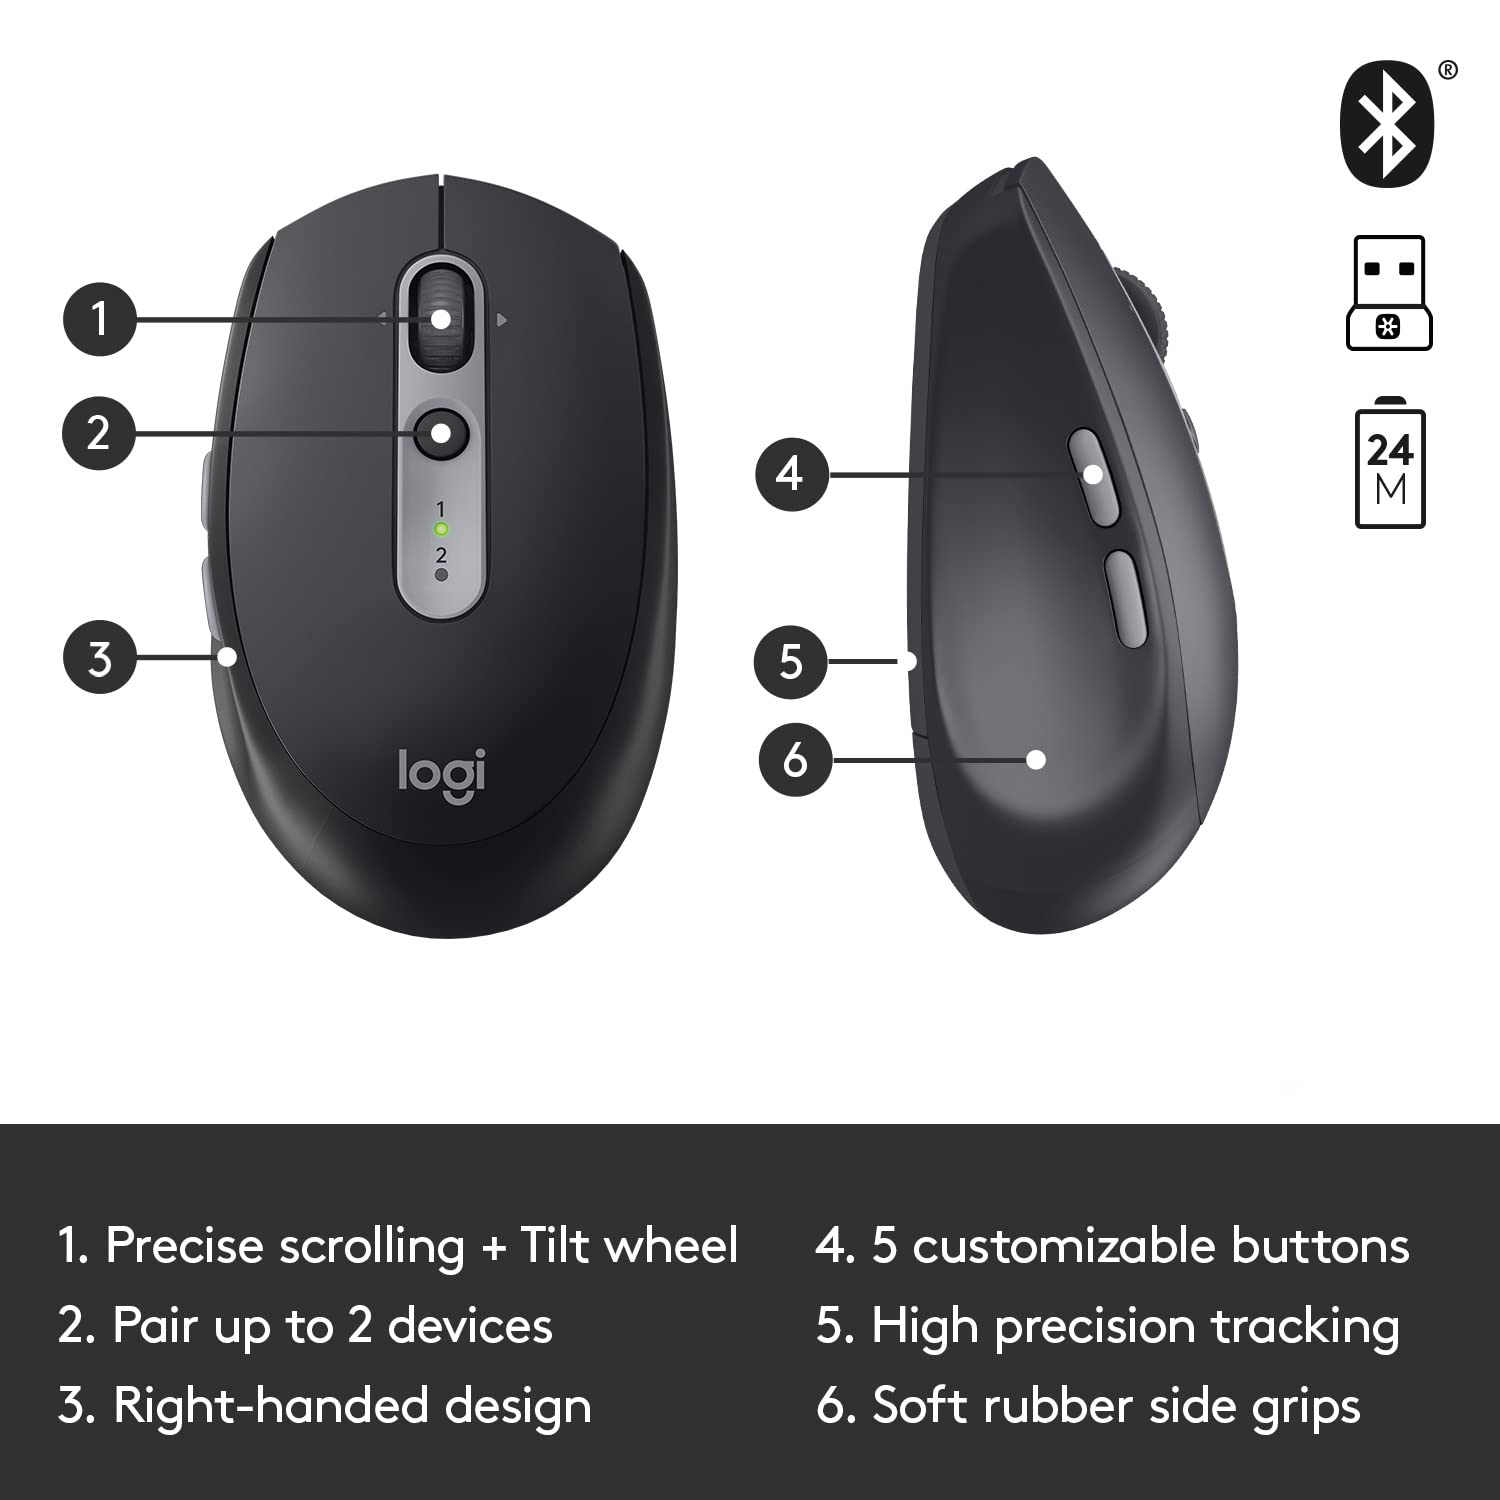 Logitech M590 Multi-Device Silent Wireless Mouse, Bluetooth, 2.4GHz USB Unifying Receiver, 1000 DPI Optical Tracking, 2-Year Battery, 5 Customisable Buttons, Compatible with PC, Mac, Laptop - Black